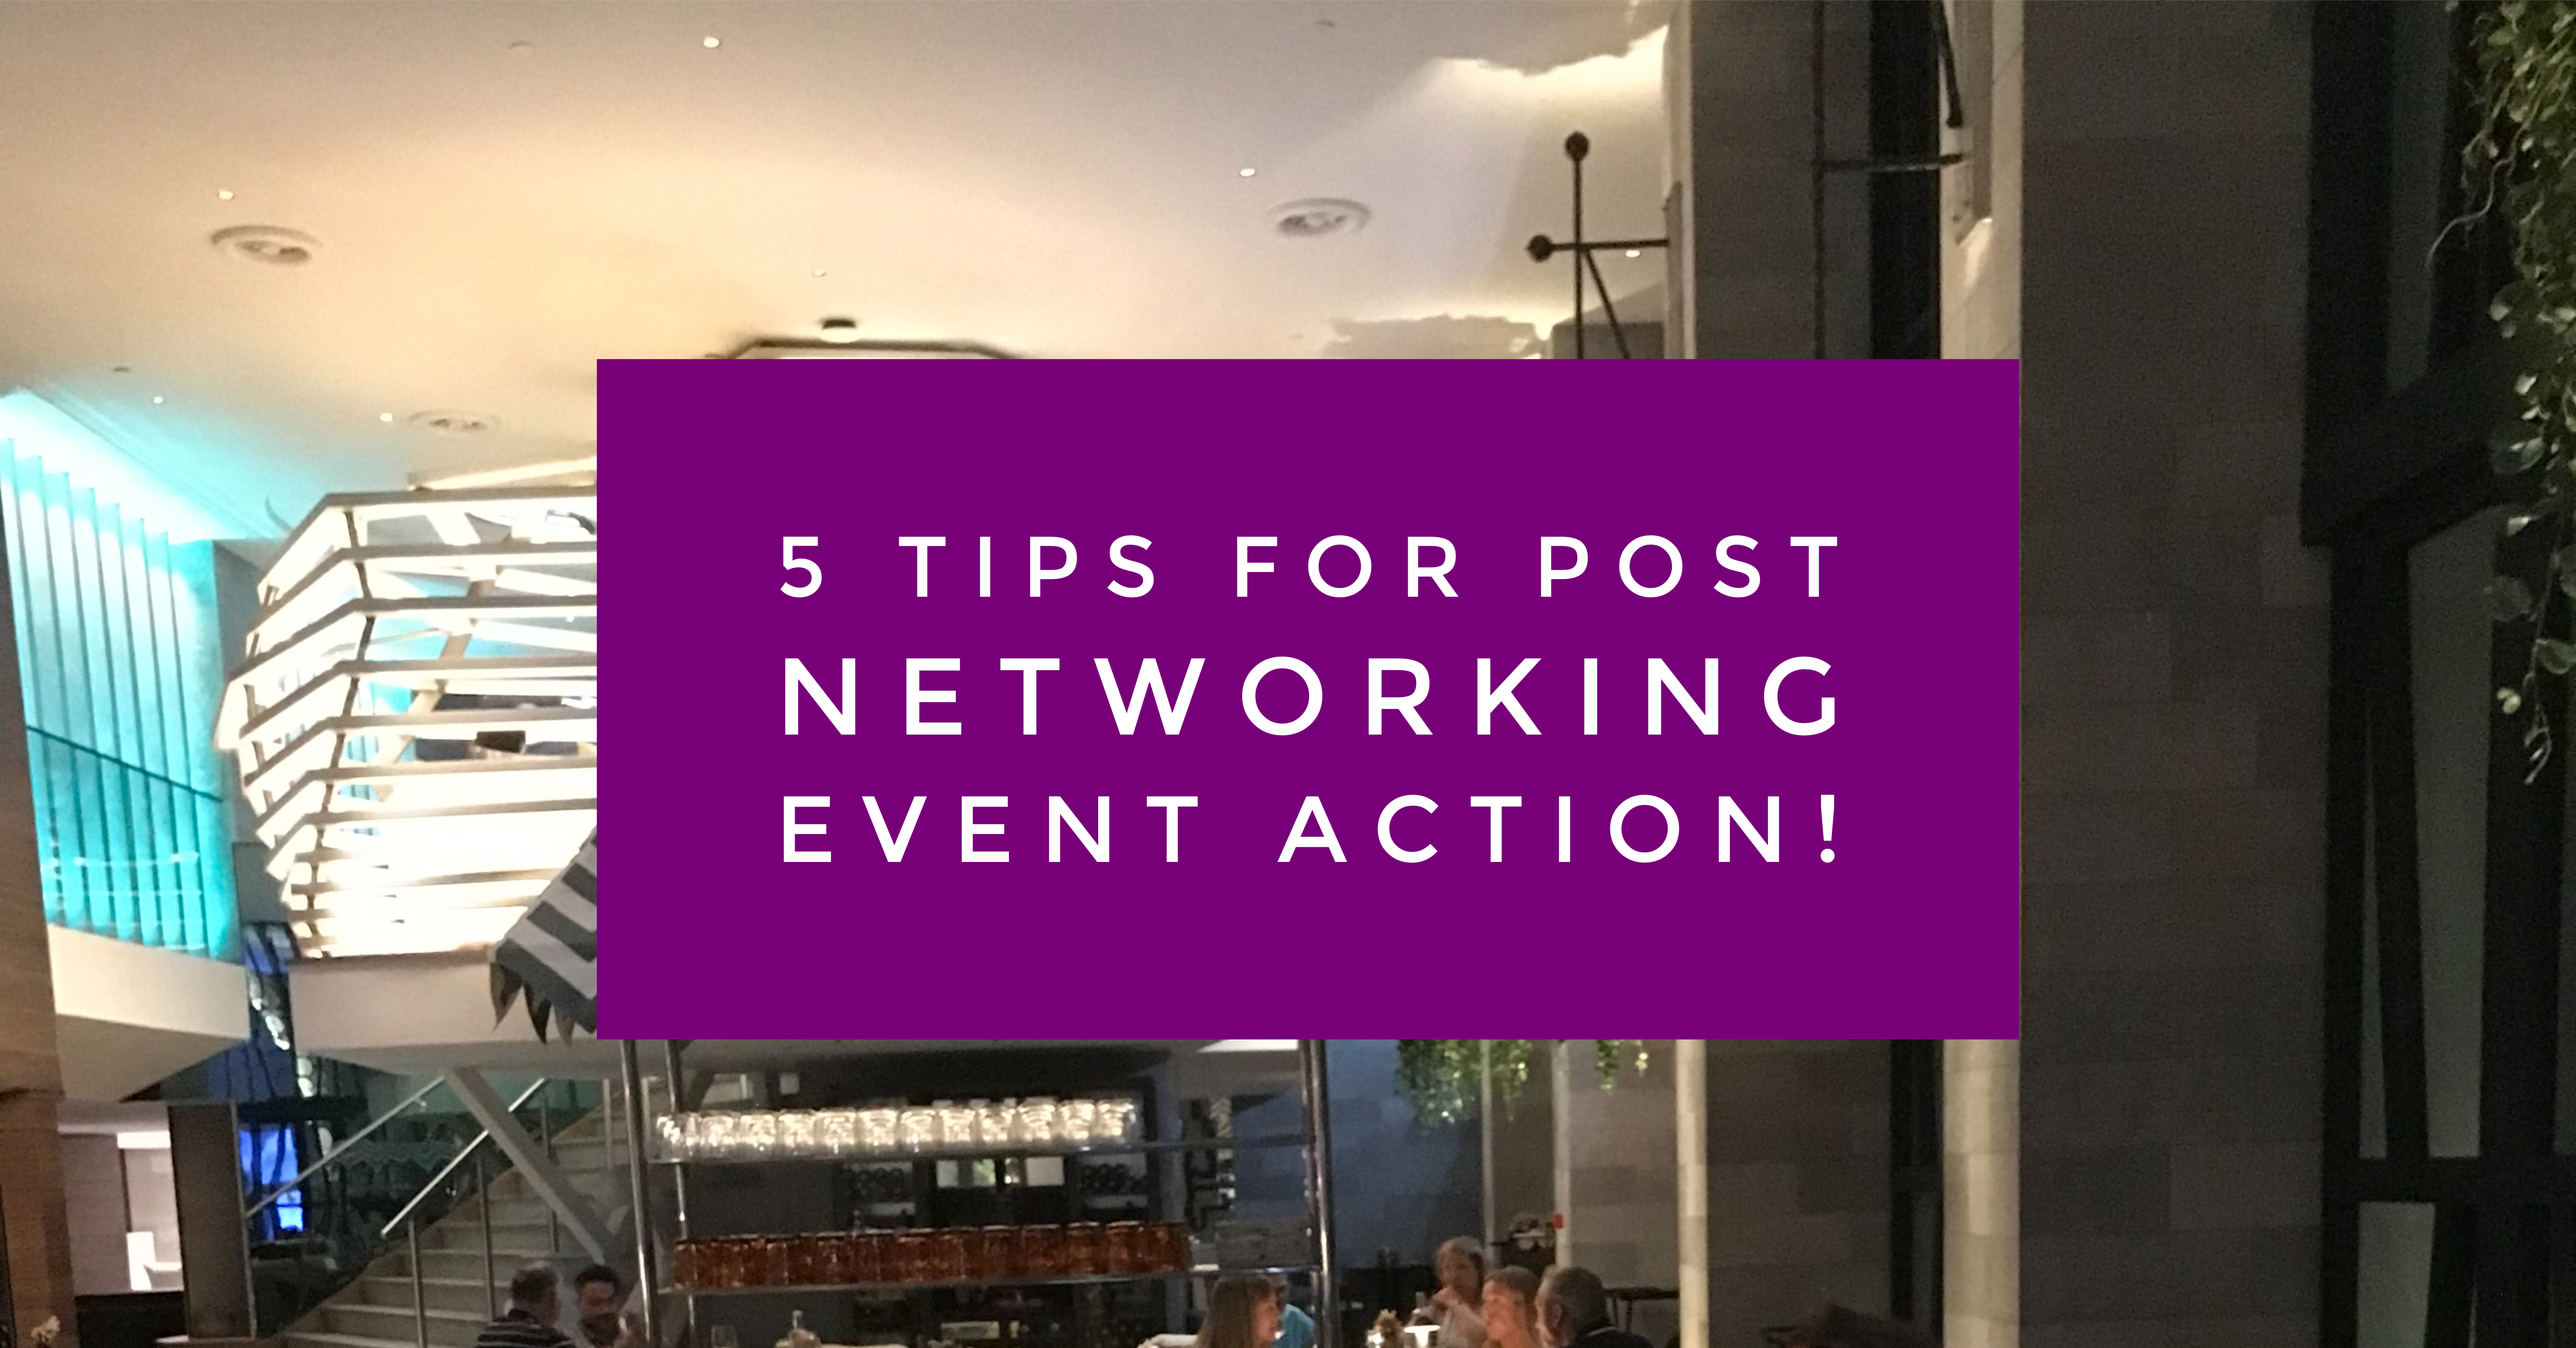 5 Tips for post networking event action Blog by Jo James AmberLife